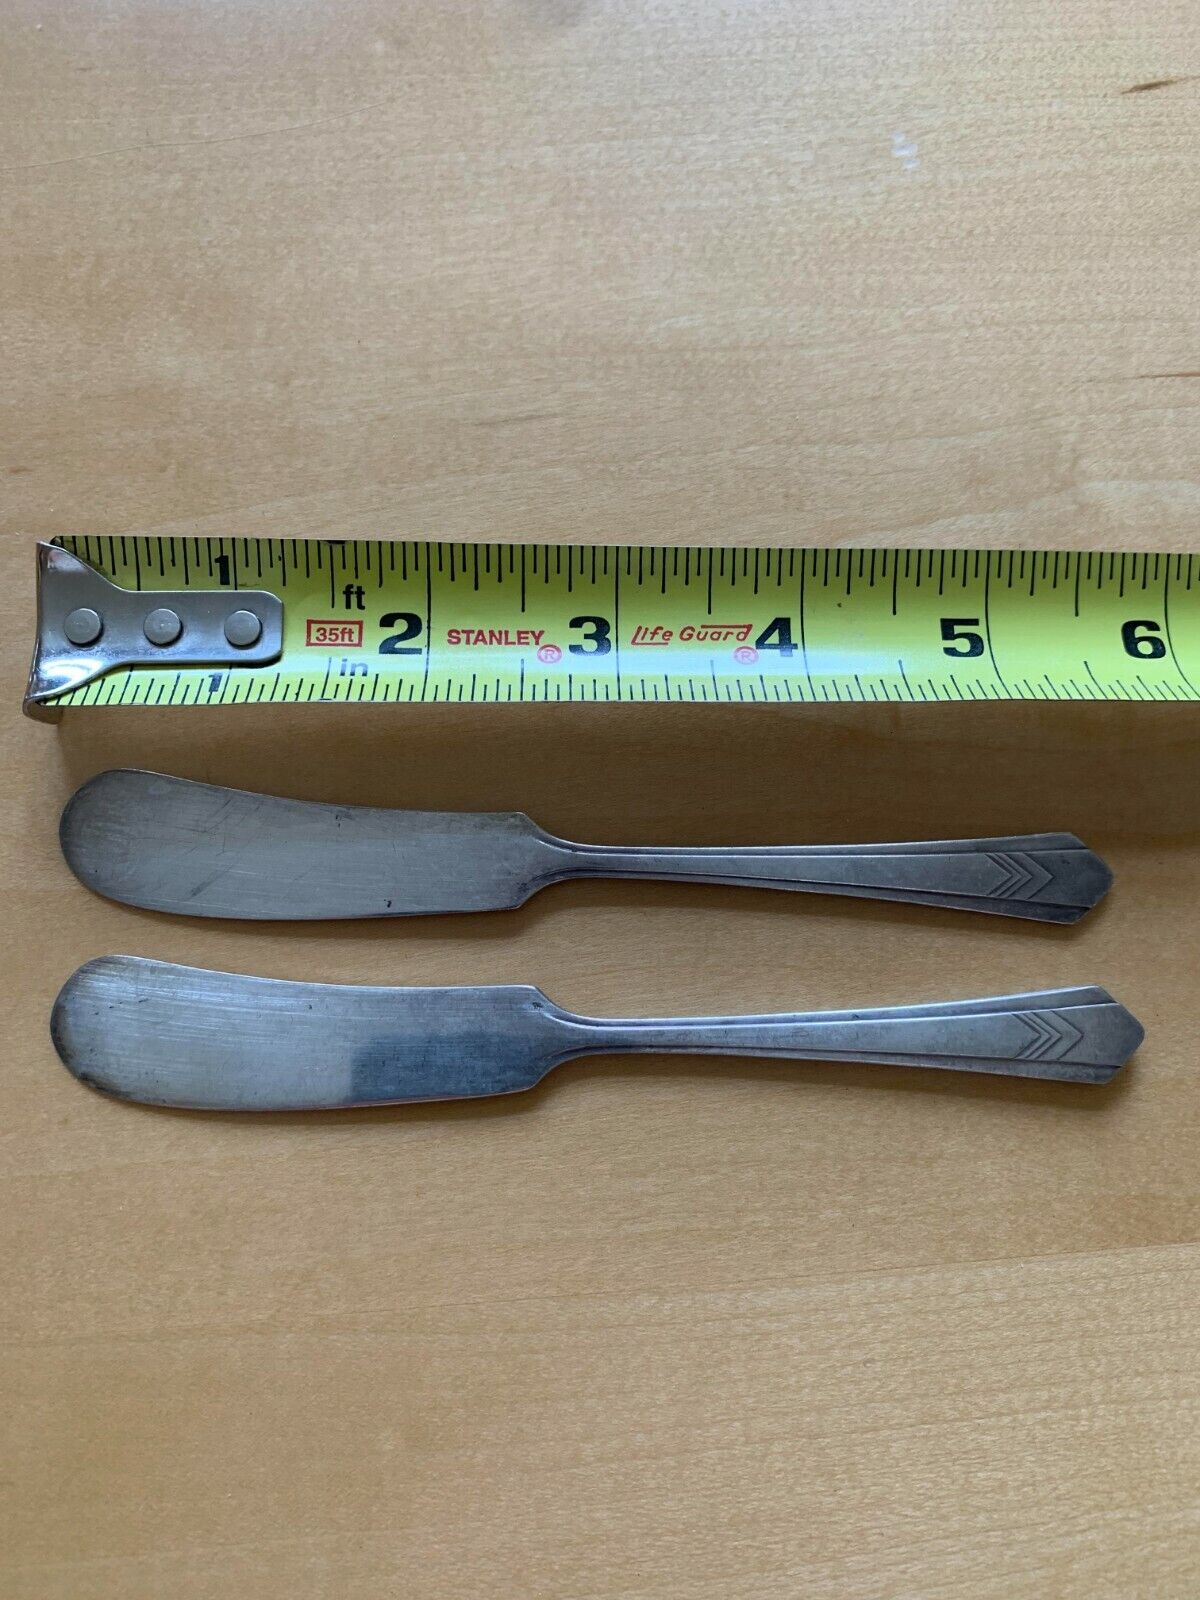 Antique Valuations: Imperial Silver Plate flat handle butter spreader set of 2 knives, spreaders